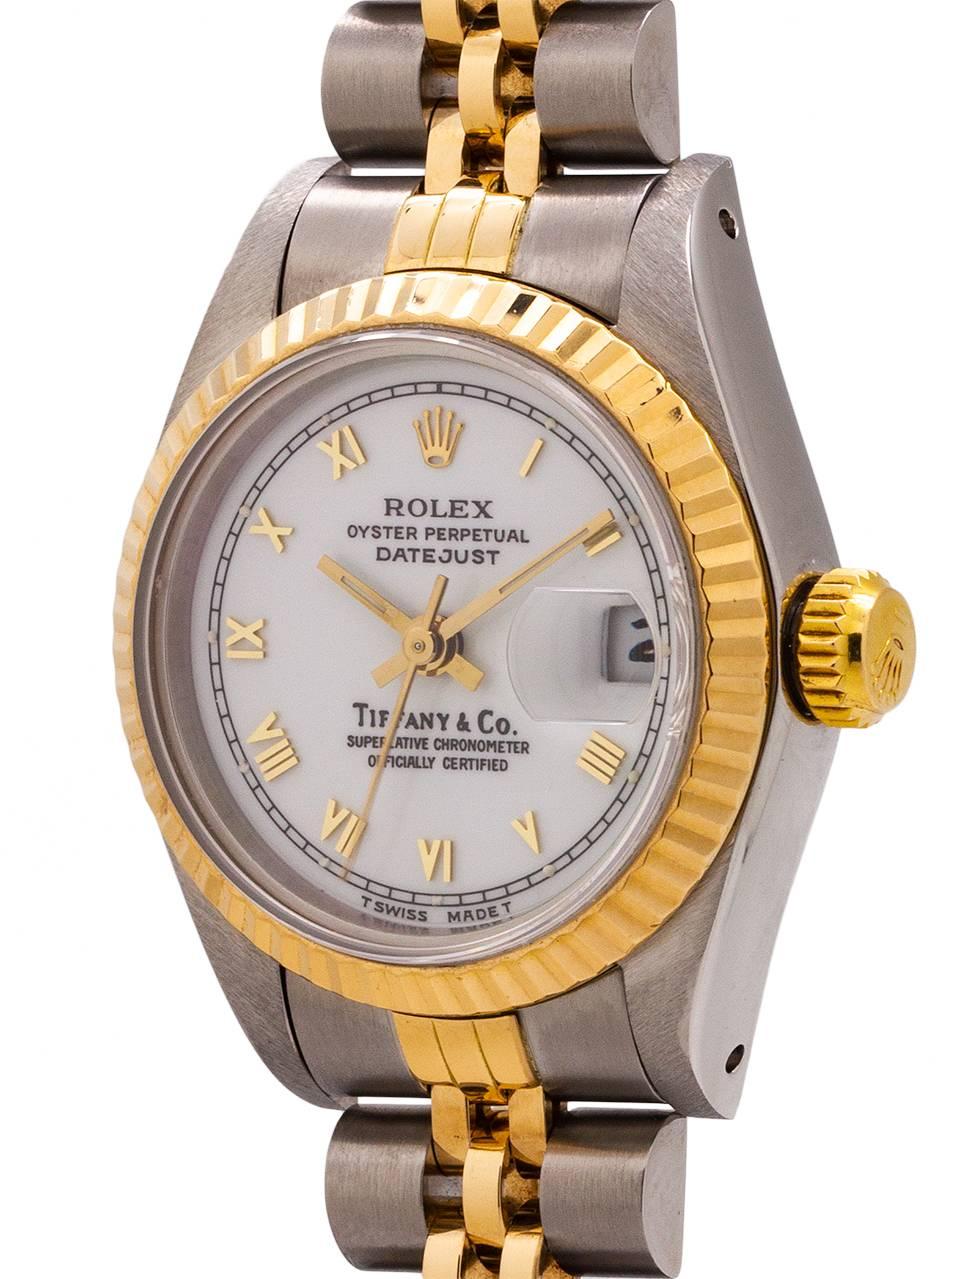 
Lady Rolex Datejust ref 69173 SS & 18K YG L2 serial # circa 1998 retailed by Tiffany & CO. Very desirable double name model featuring 27mm diameter case, 18K YG fluted bezel, sapphire crystal, original white enamel dial signed Tiffany & Co, with